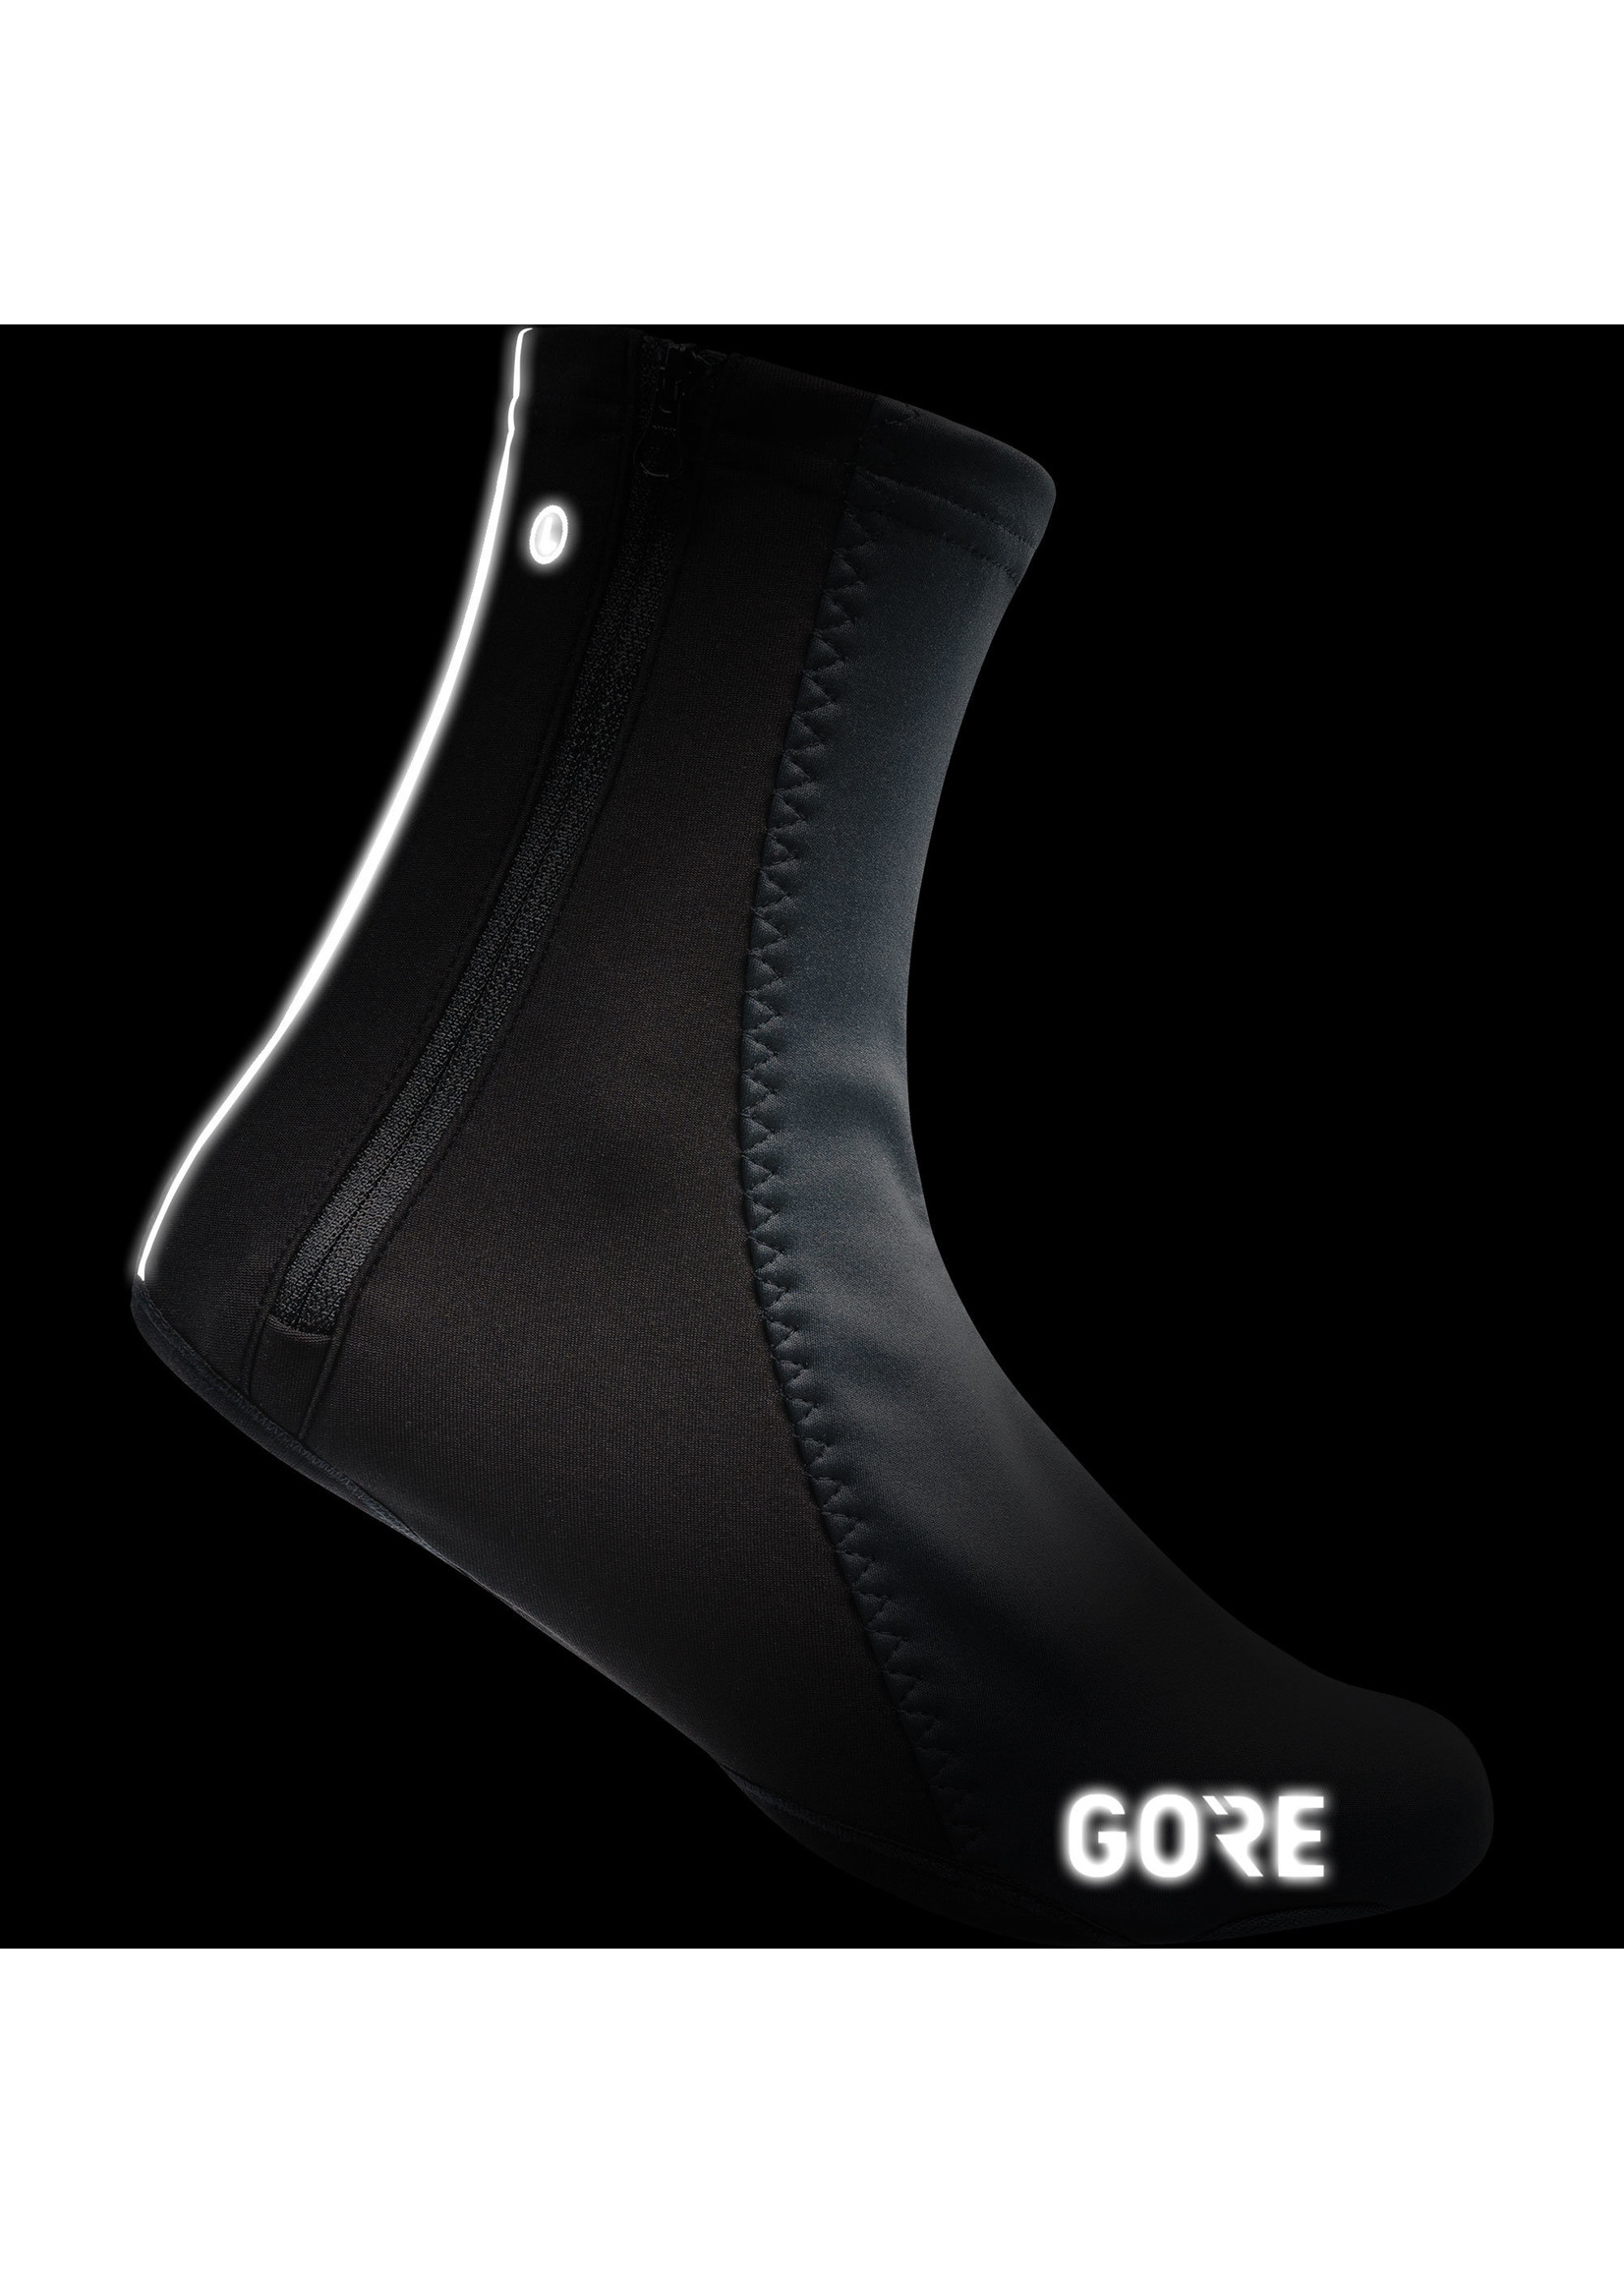 GORE GORE C5 WINDSTOPPER®Thermo Overshoes - Black, Fits Shoe Sizes 11-13